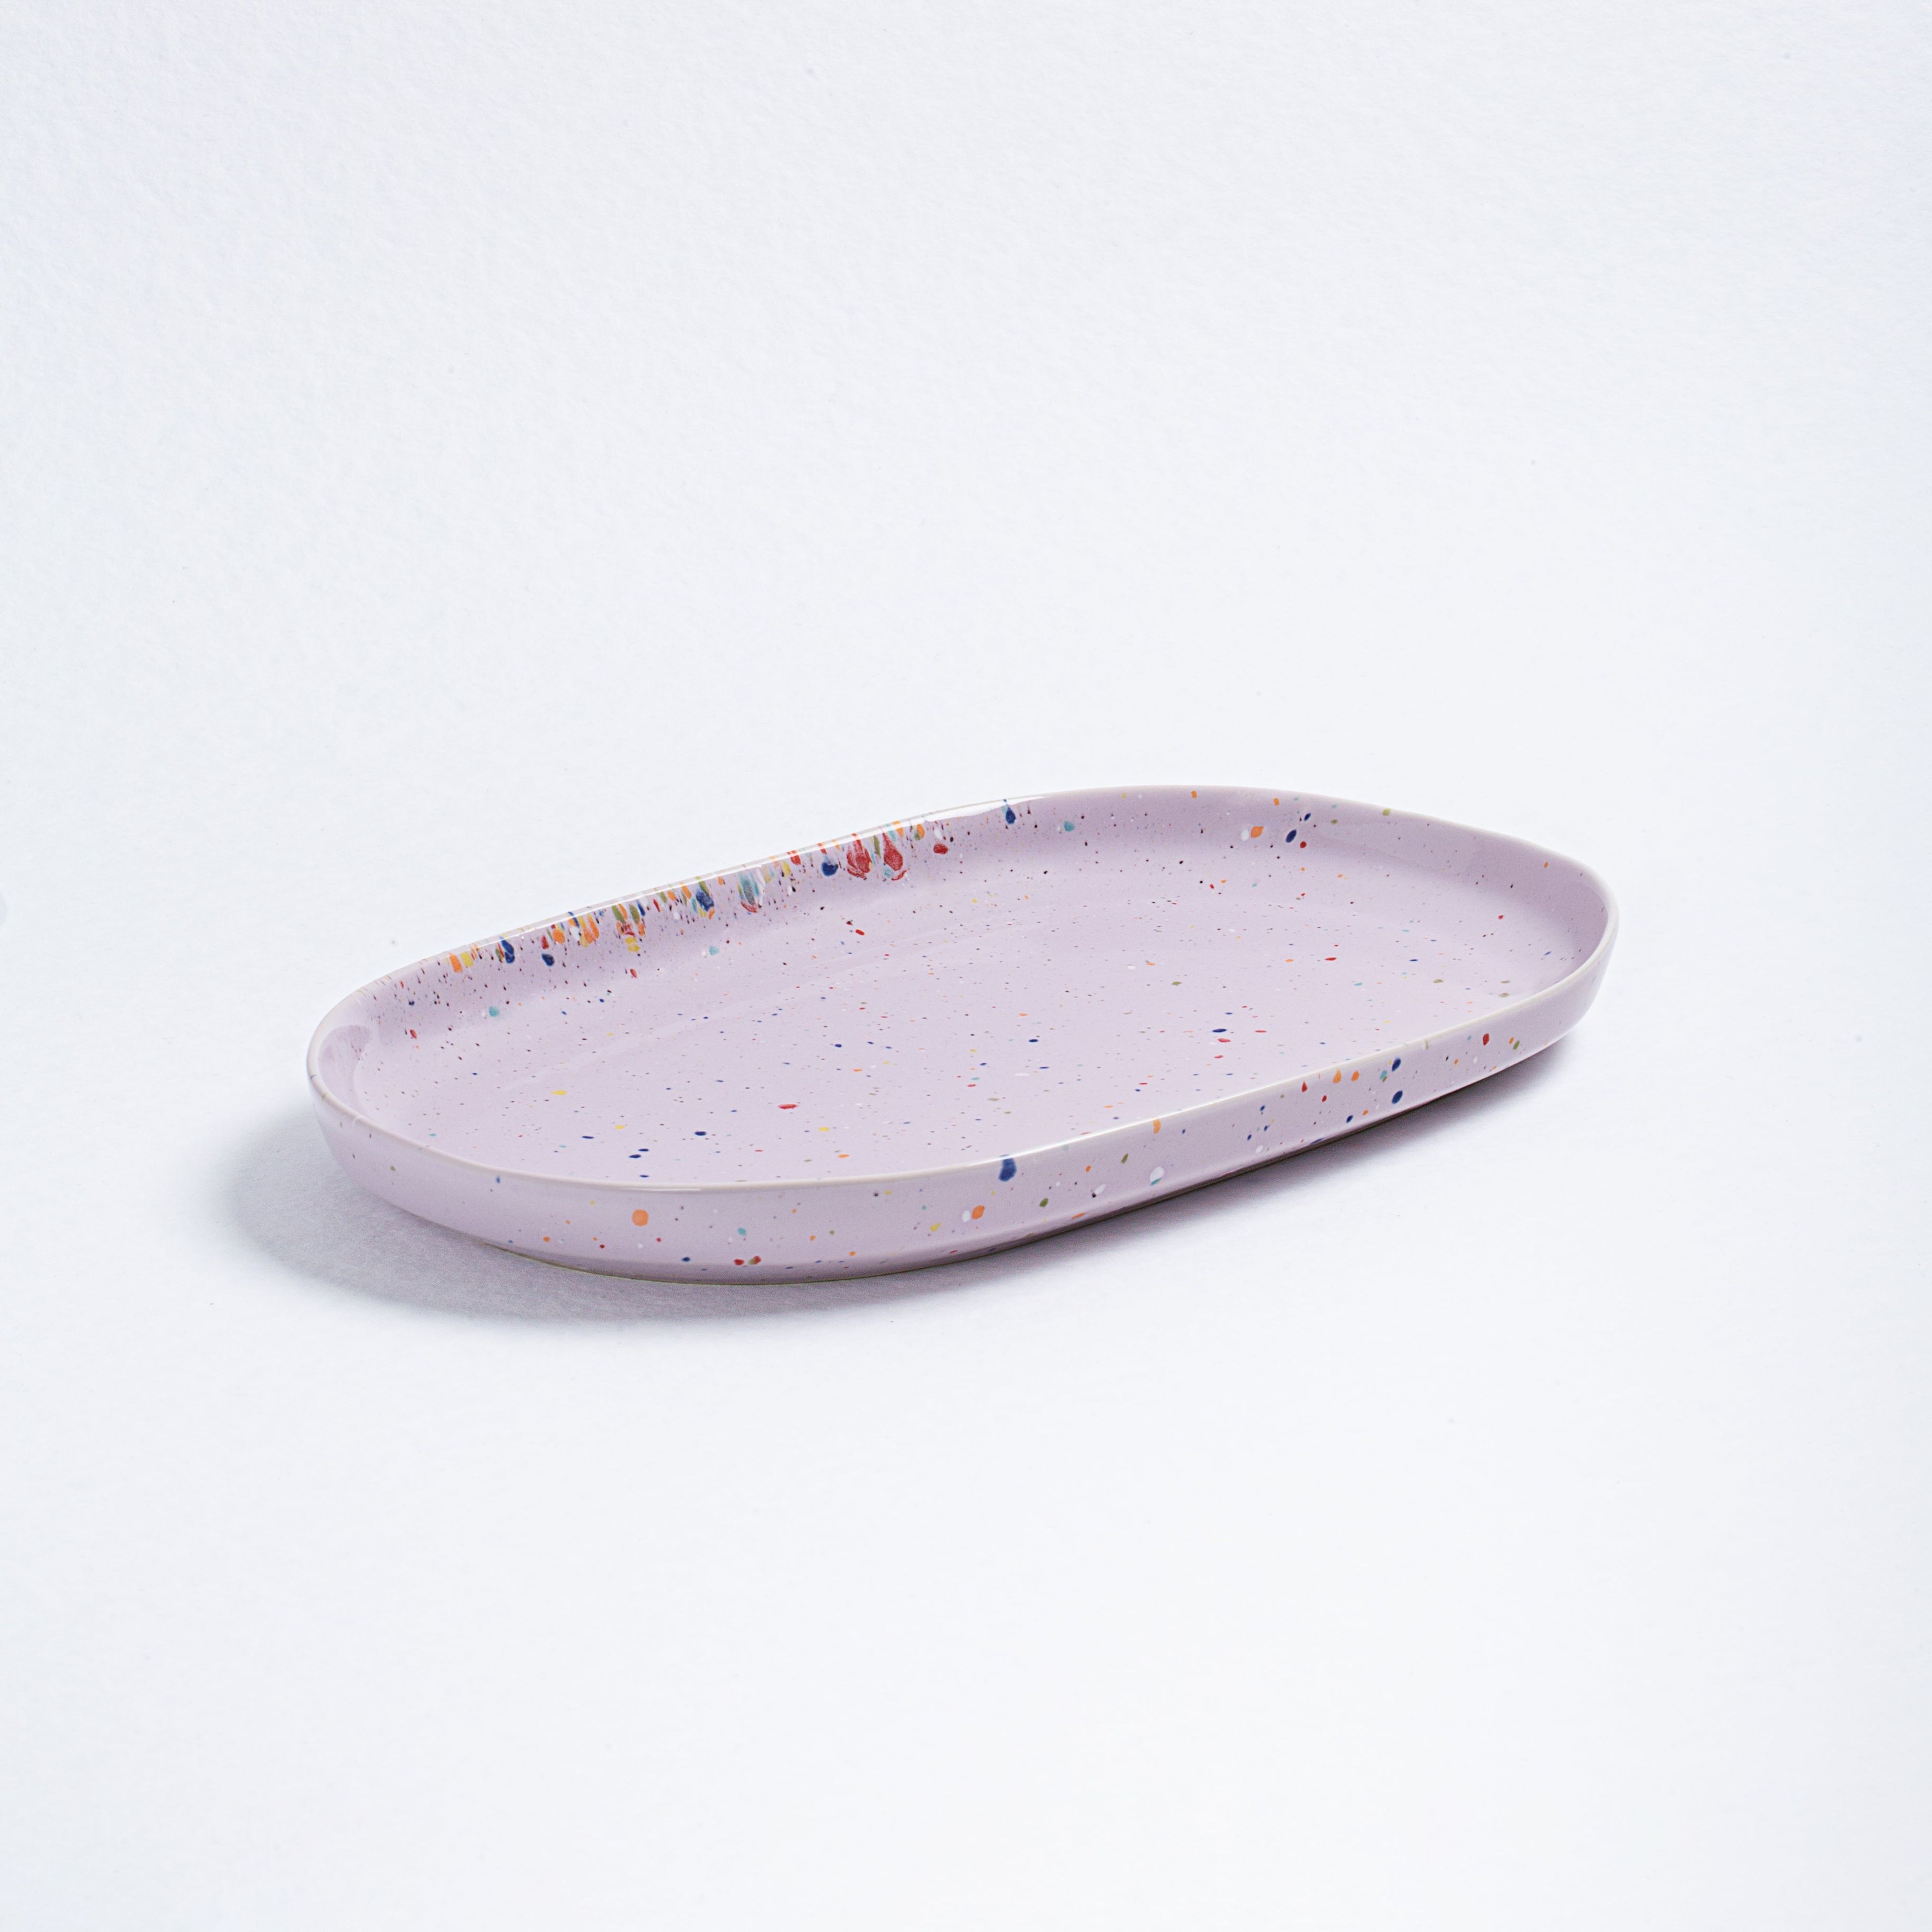 New Party Oval Tray